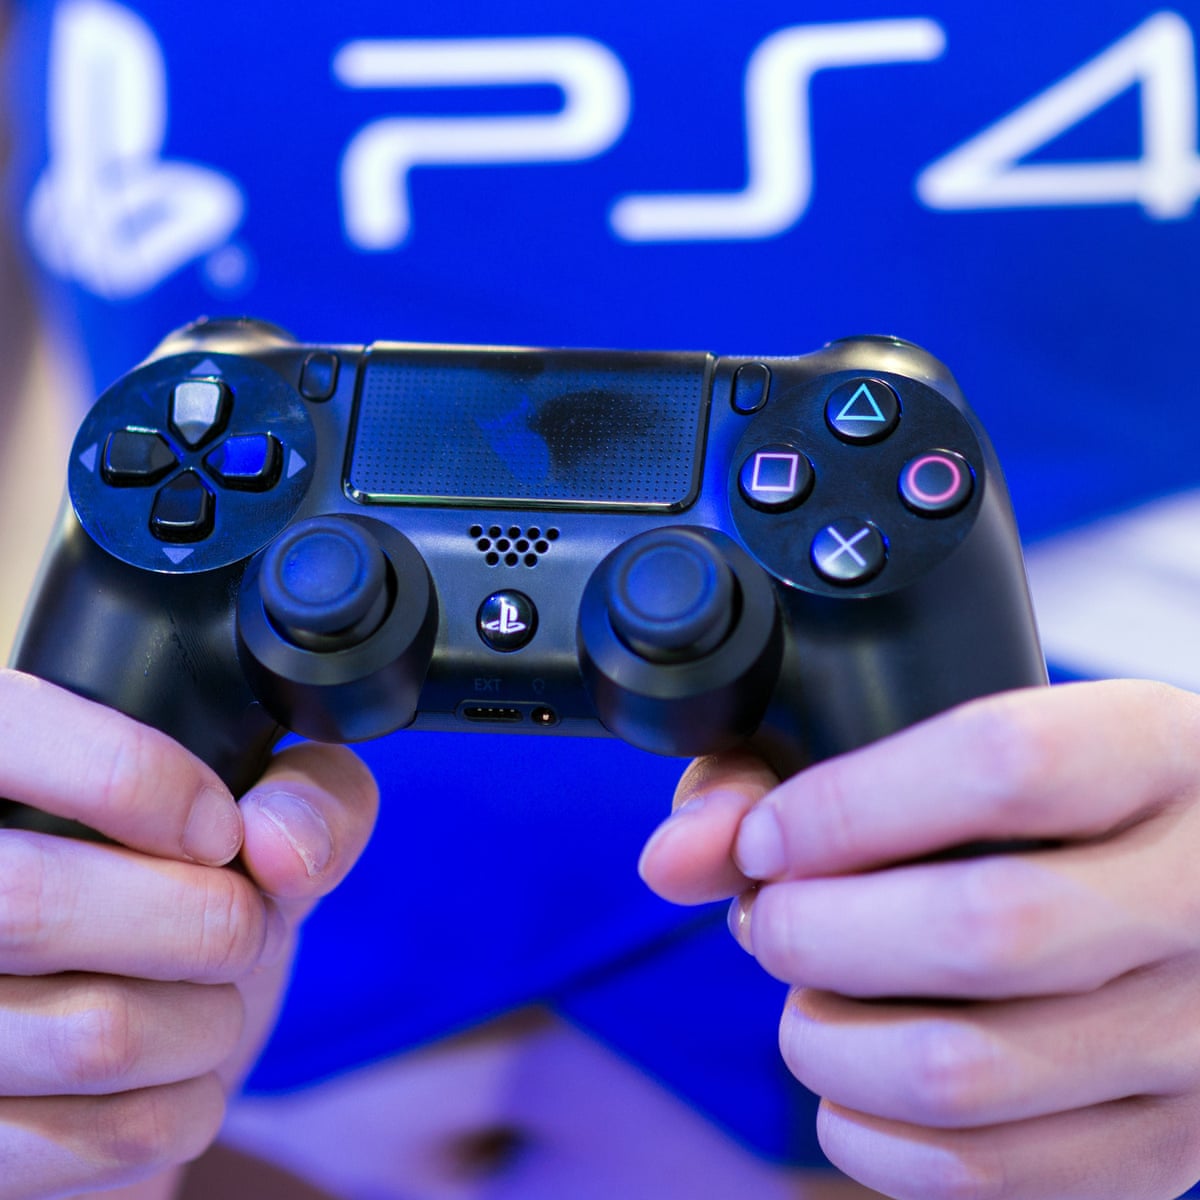 The of a modified PlayStation 4 controller means more than heartwarming | Games | The Guardian